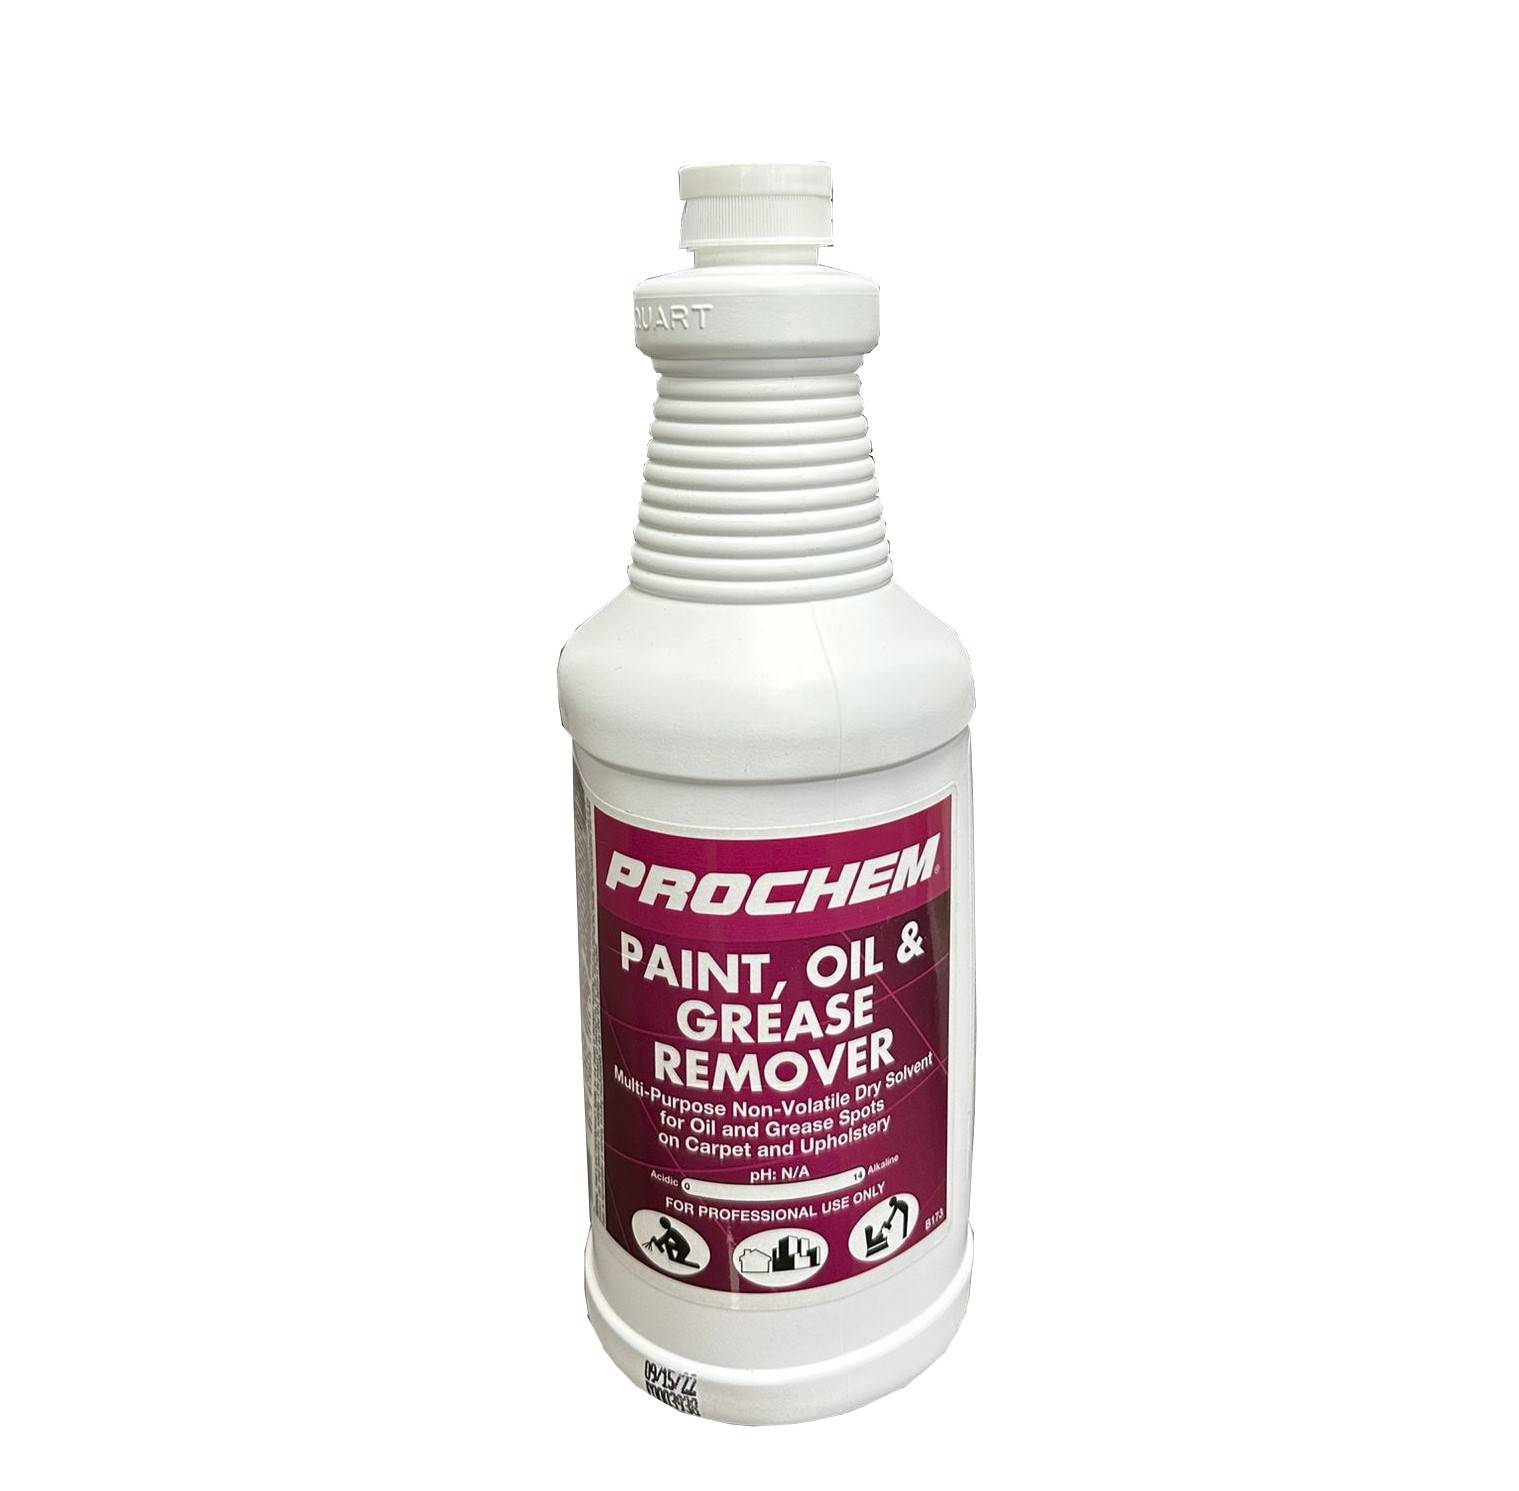 https://www.magicwandcompany.com/wp-content/uploads/2016/06/Paint-Oil-Grease-Remover.jpg